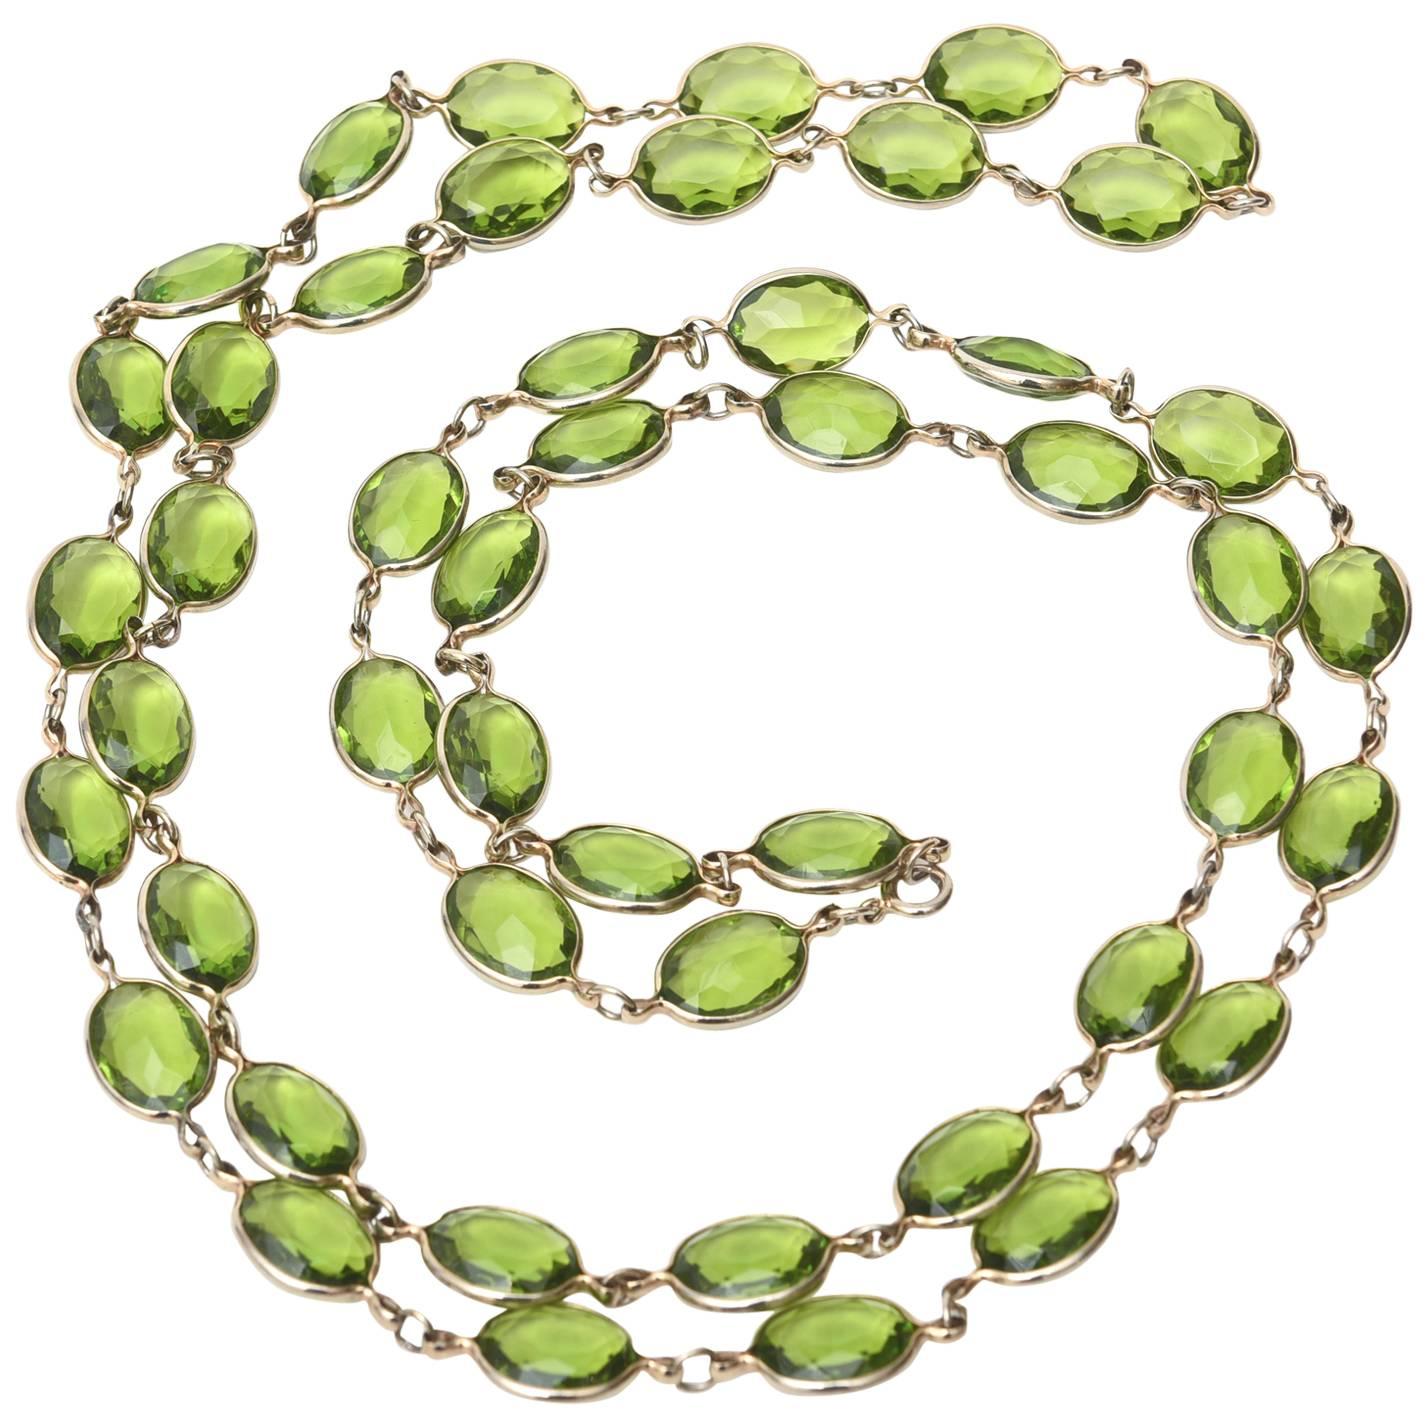 Strand of Chartreuse Glass Chain Necklace 